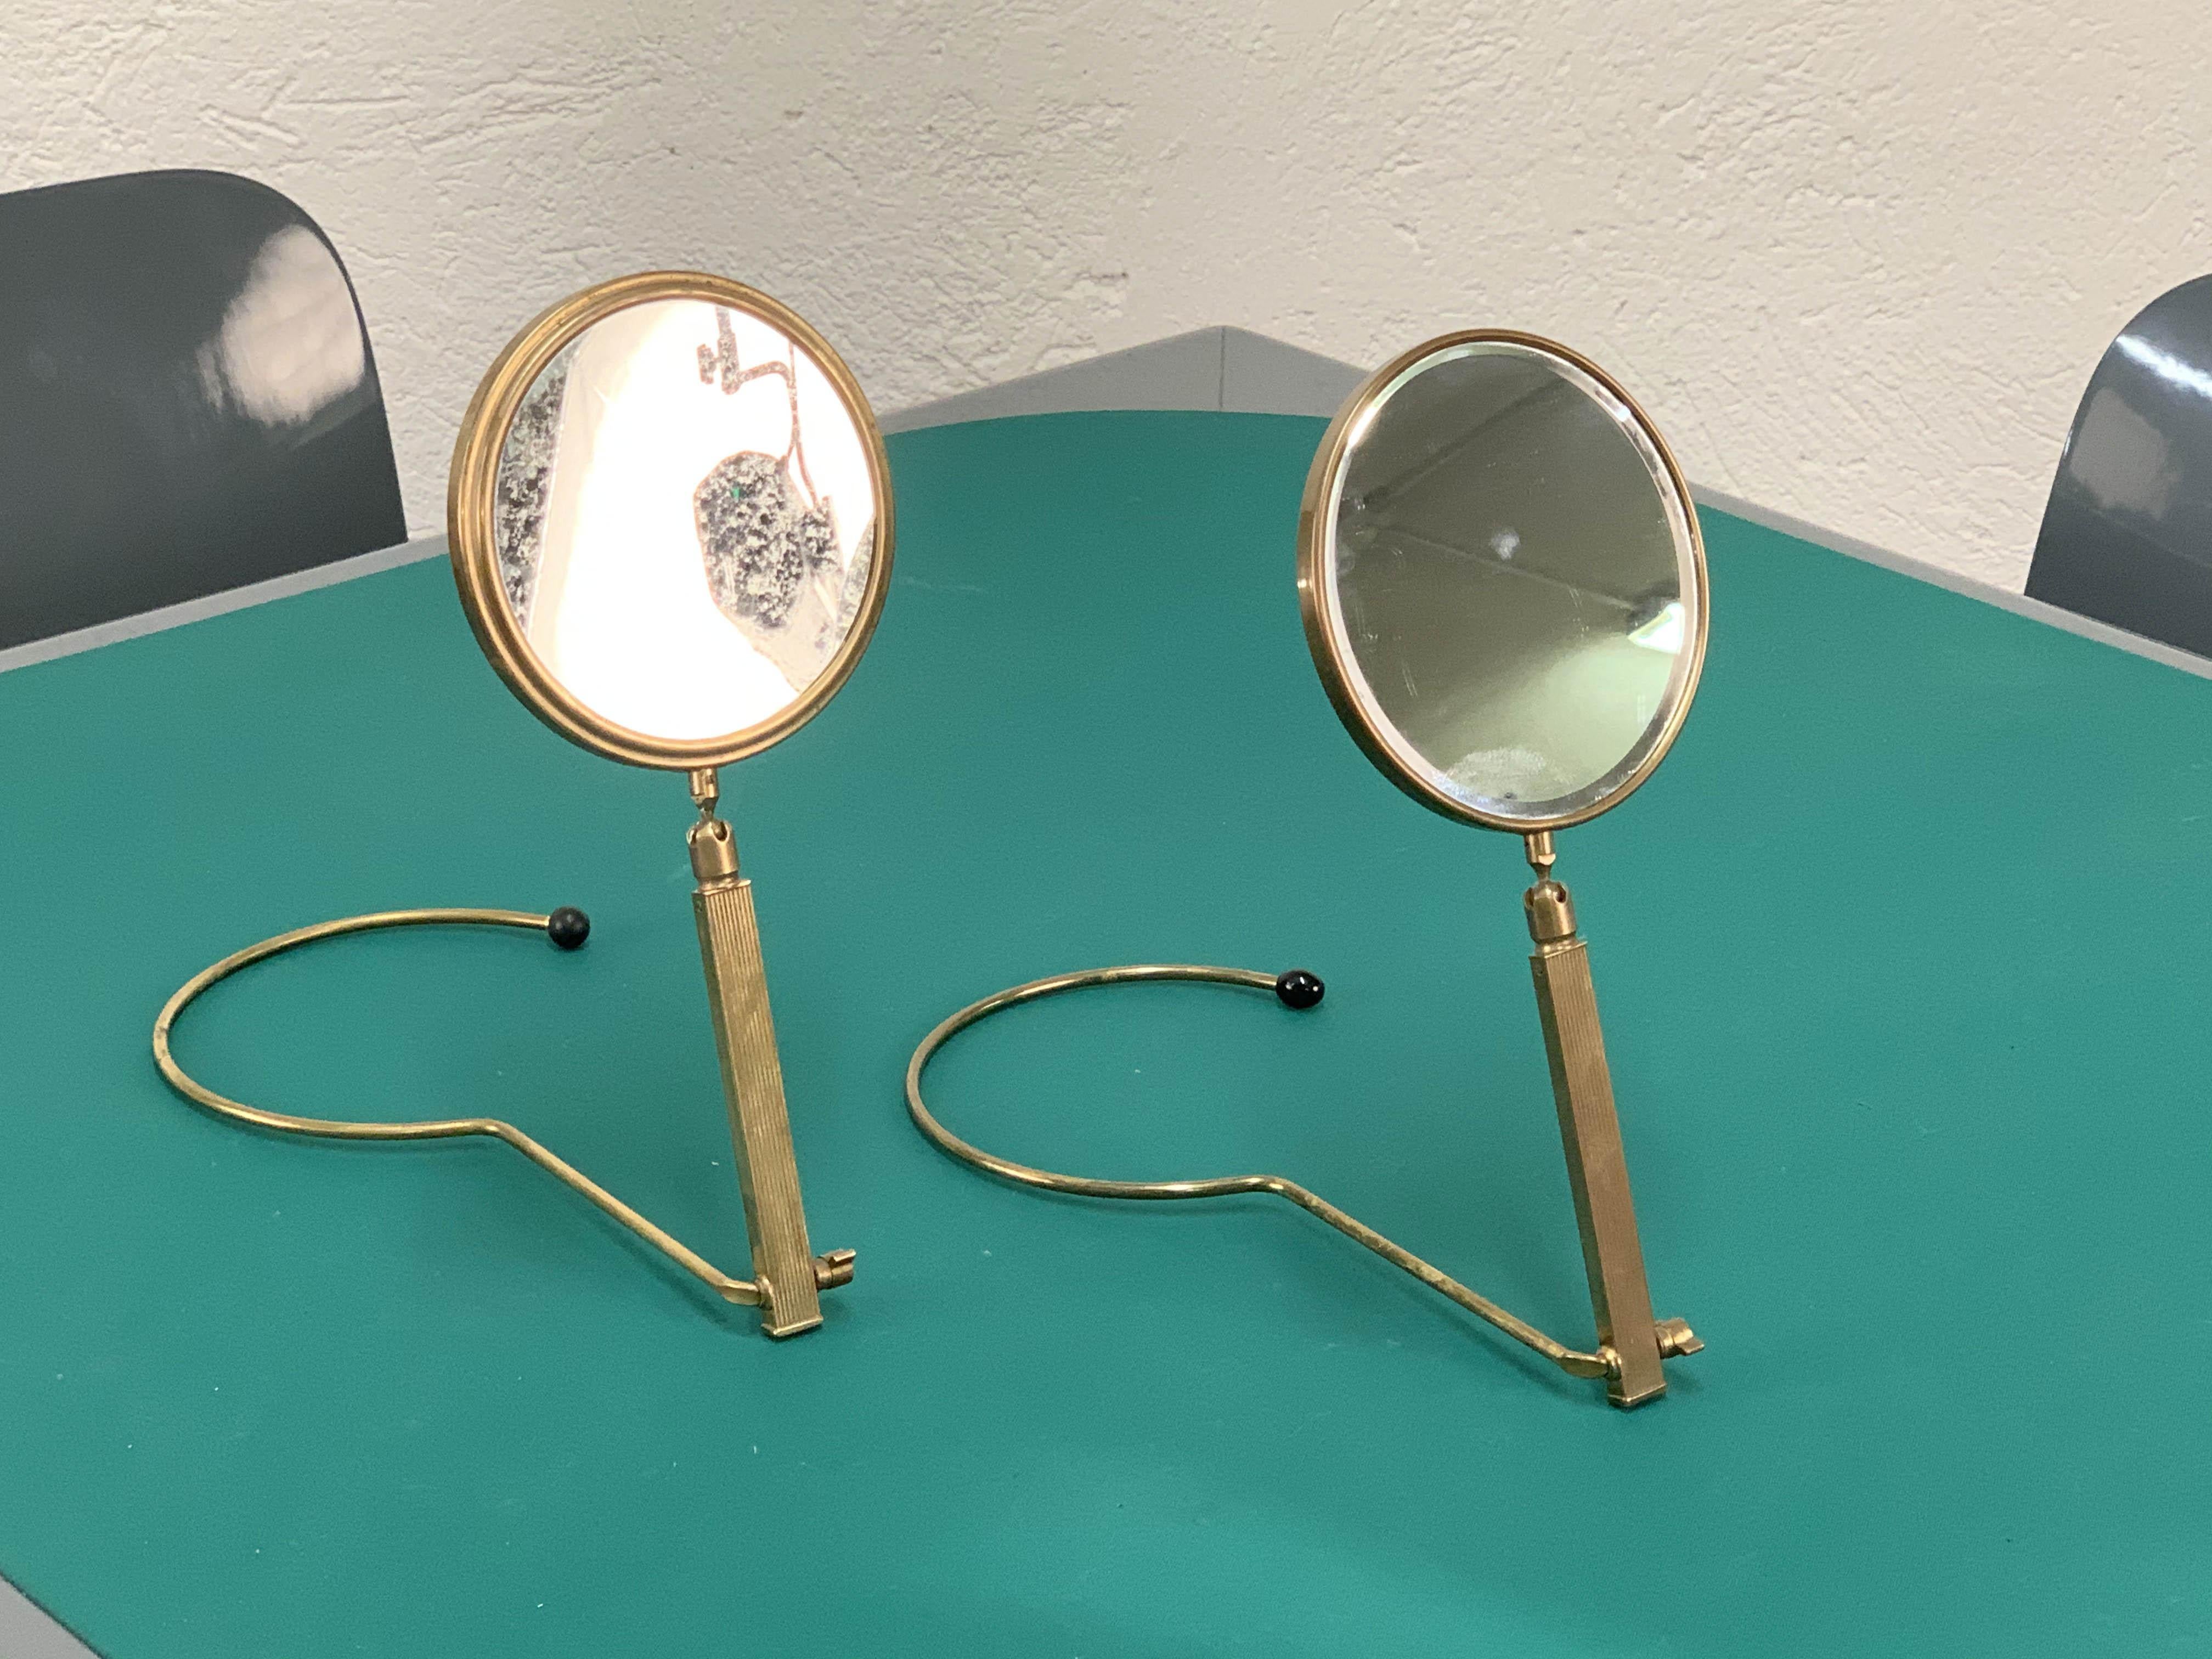 Midcentury Brass French Adjustable Table Mirror with a Two-Sides Stand, 1950s For Sale 10